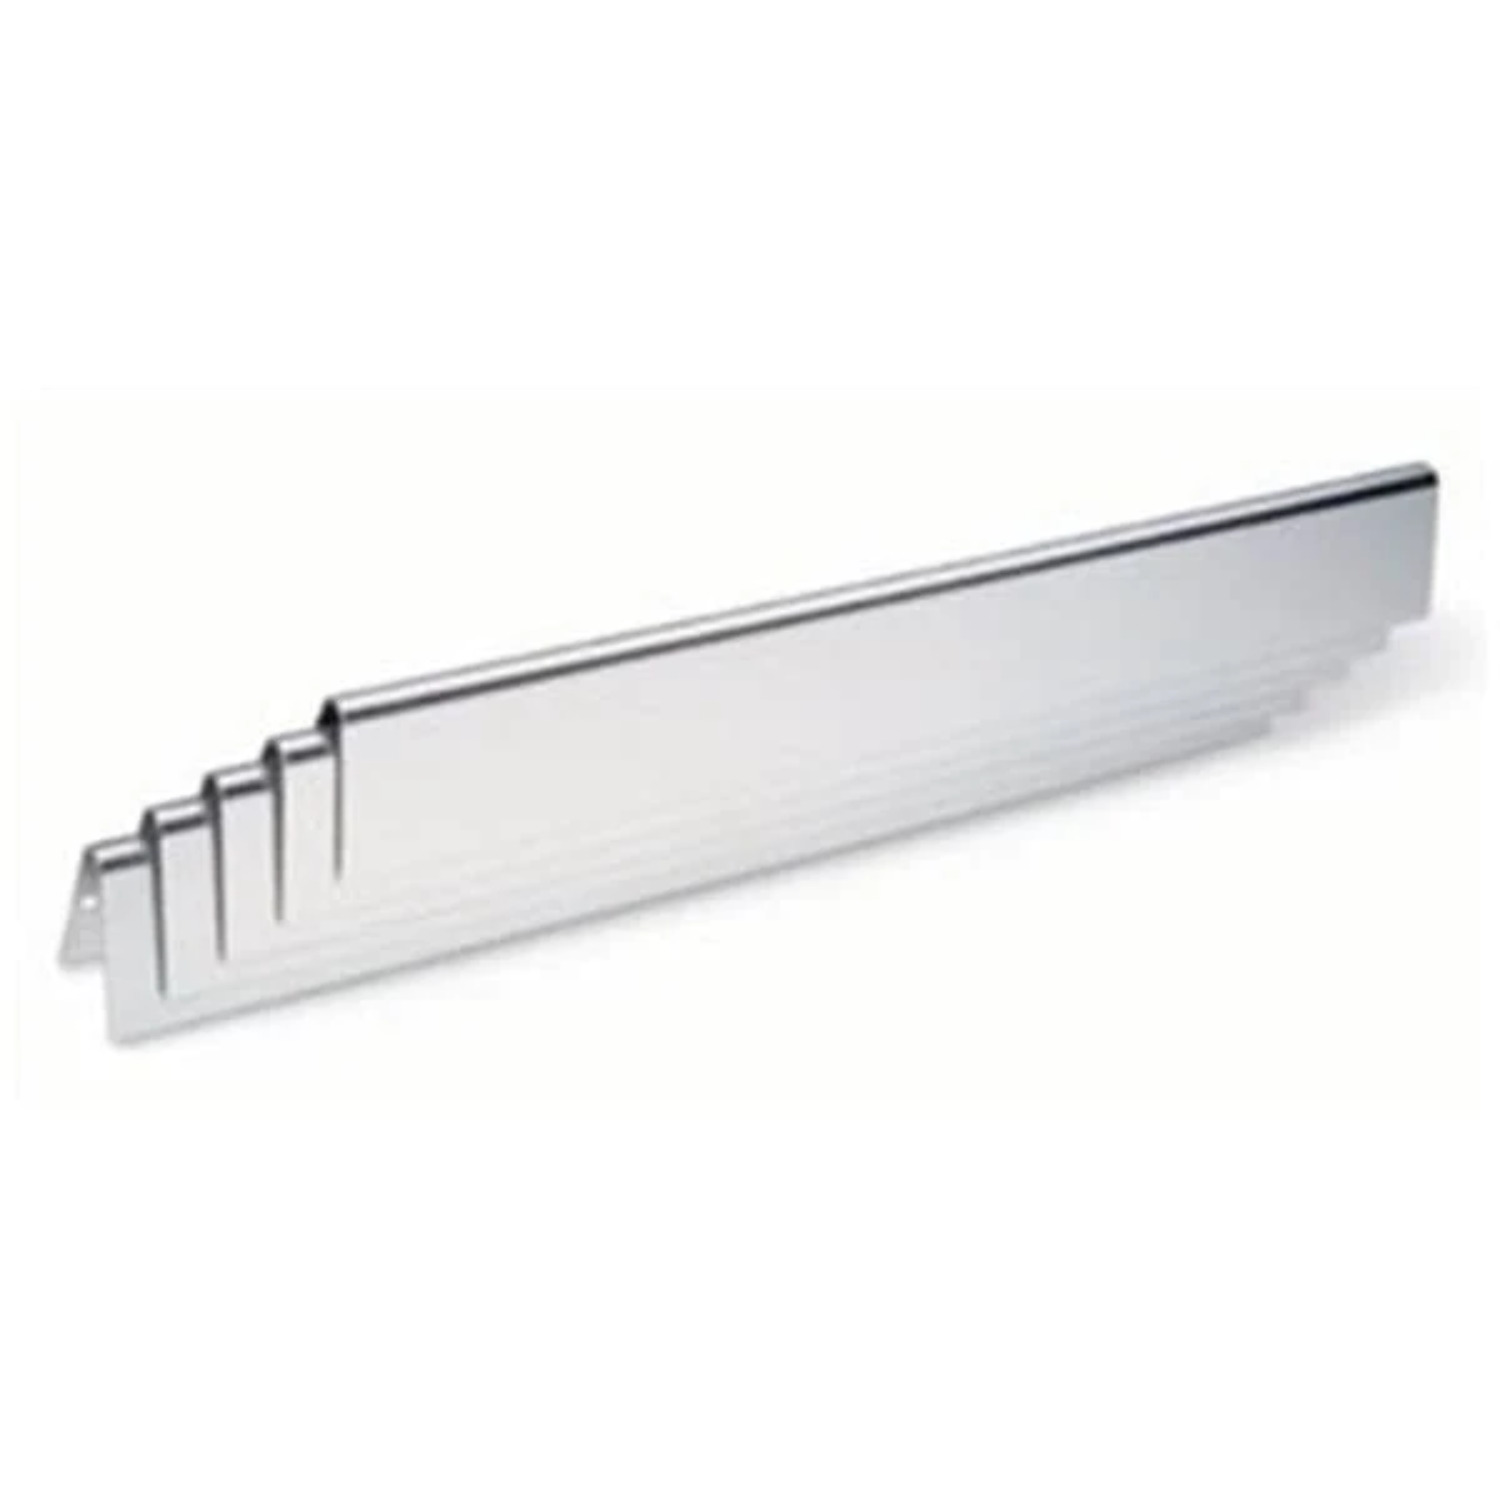 BBQ Grill Compatible With Weber Grills Heat Plate 5-Pack SS Flavorizer Bar Set 22 1/2 Long BCP65903 - image 1 of 3